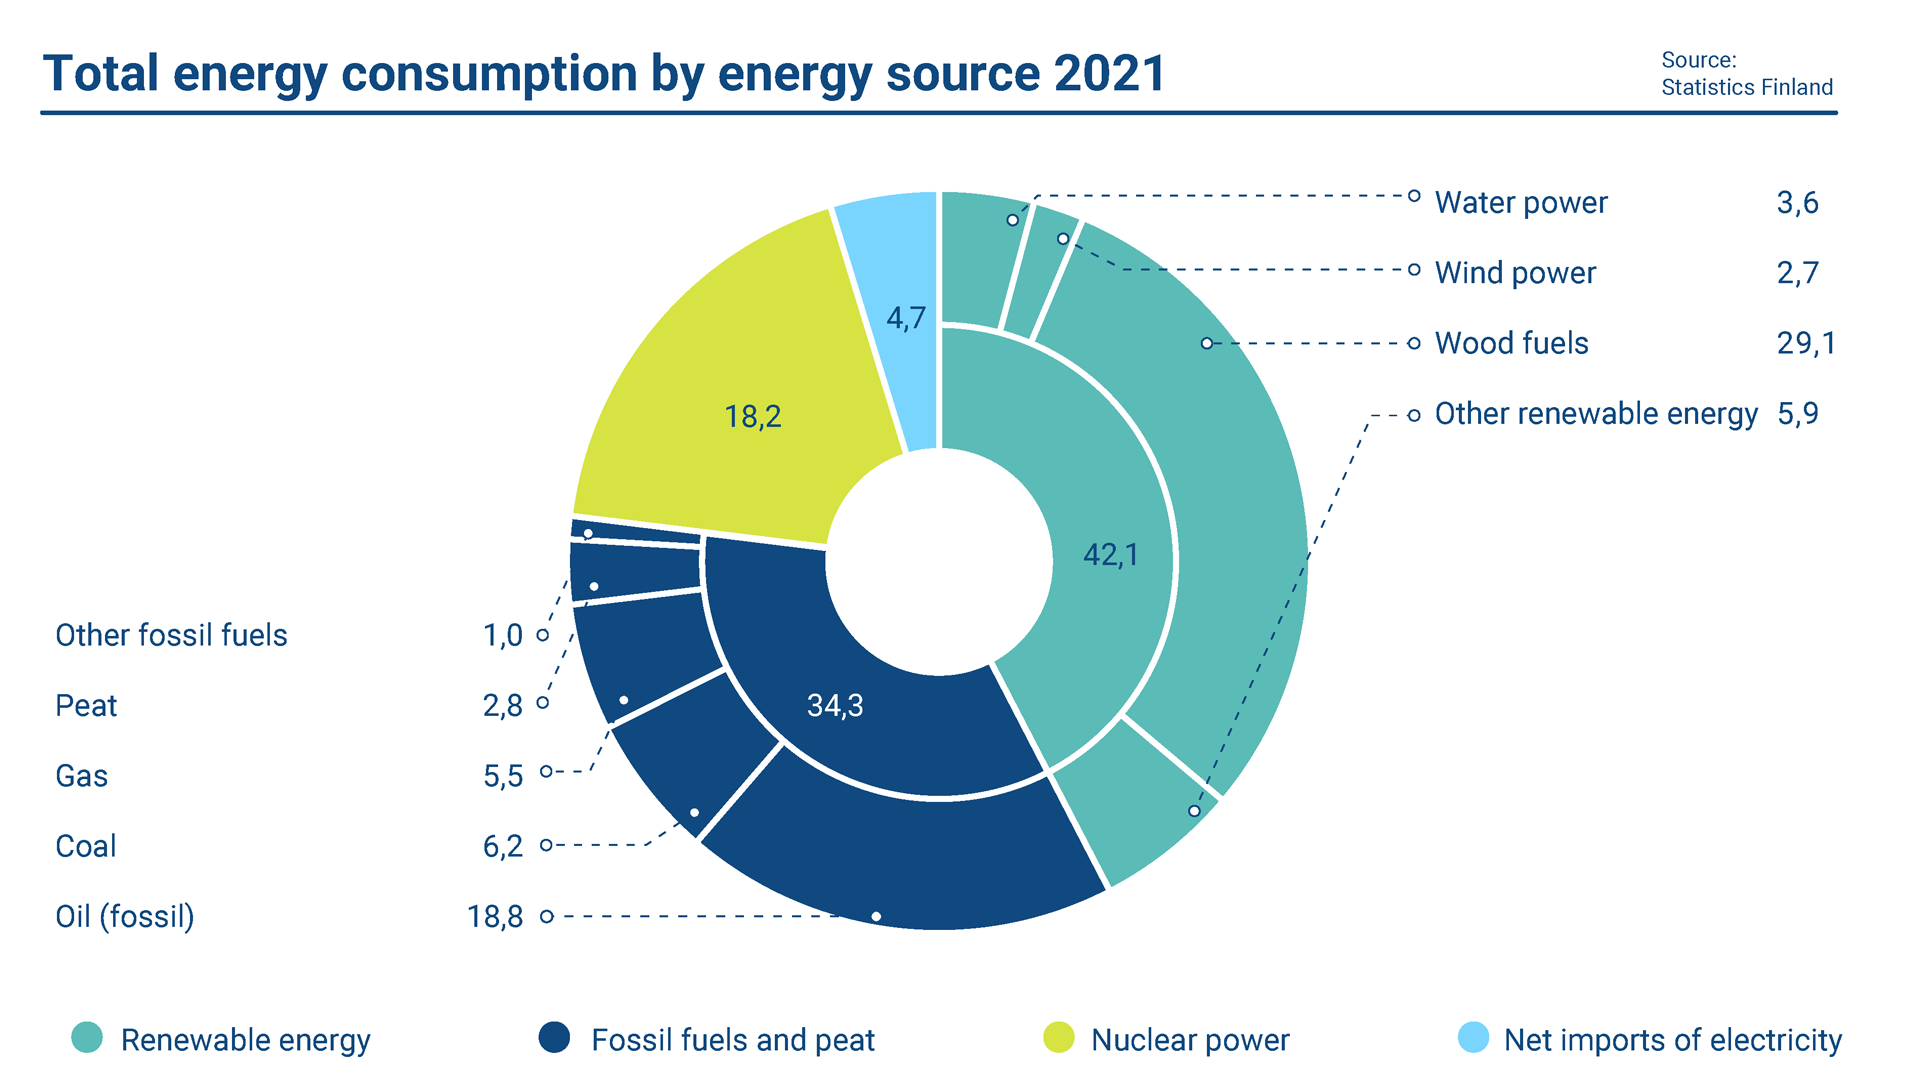 The image shows Finland's total energy consumption in 2021.